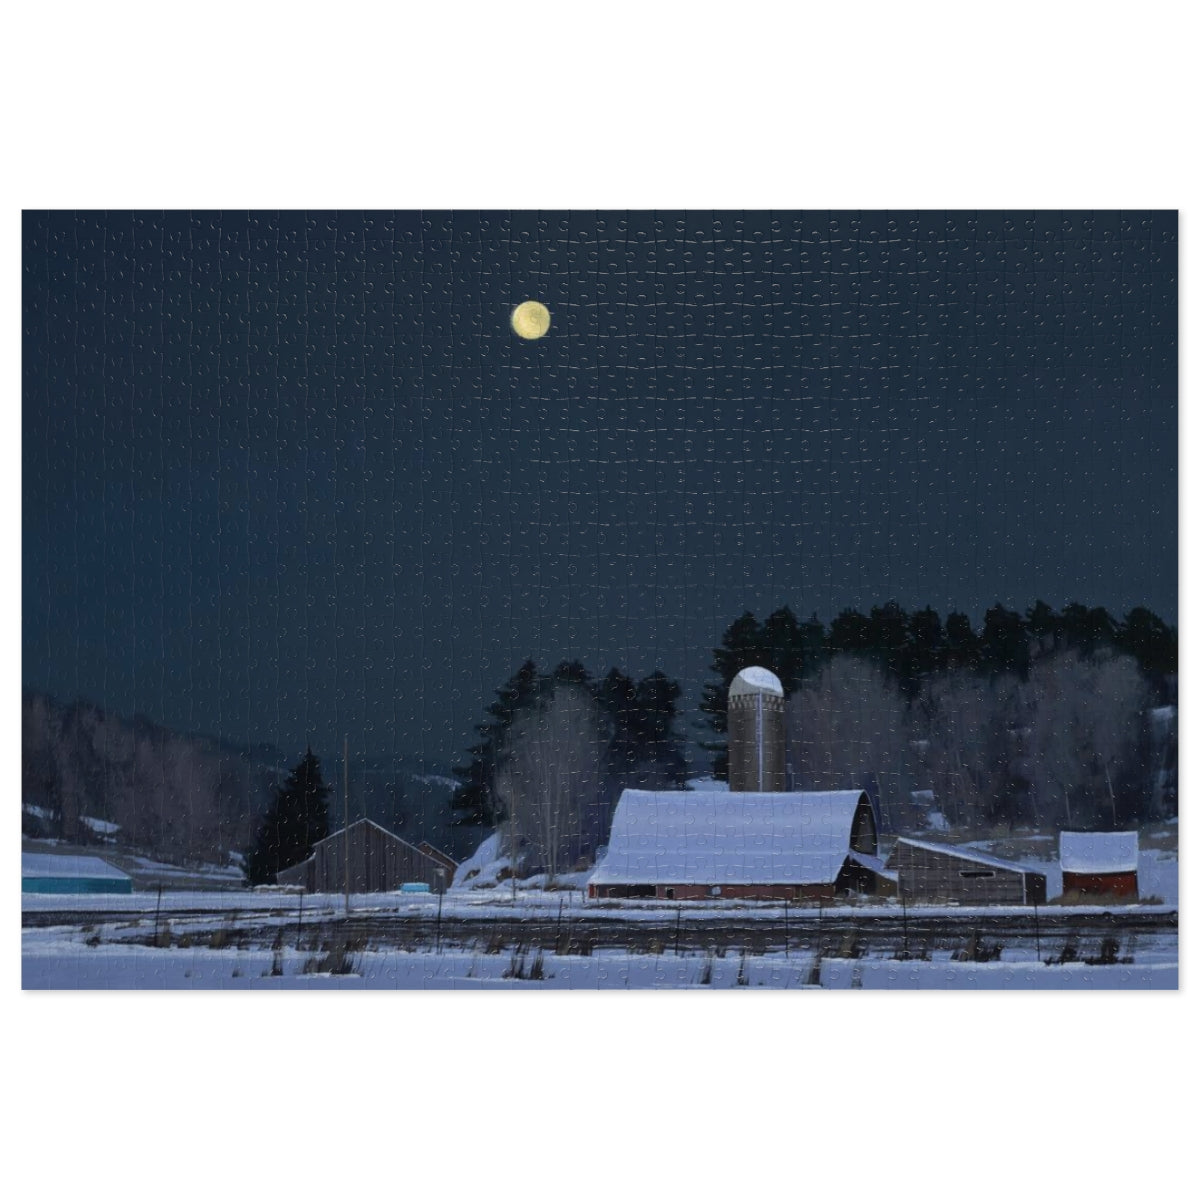 Puzzle - Ben Bauer 's Moonset, 7 Minutes to Sun Up